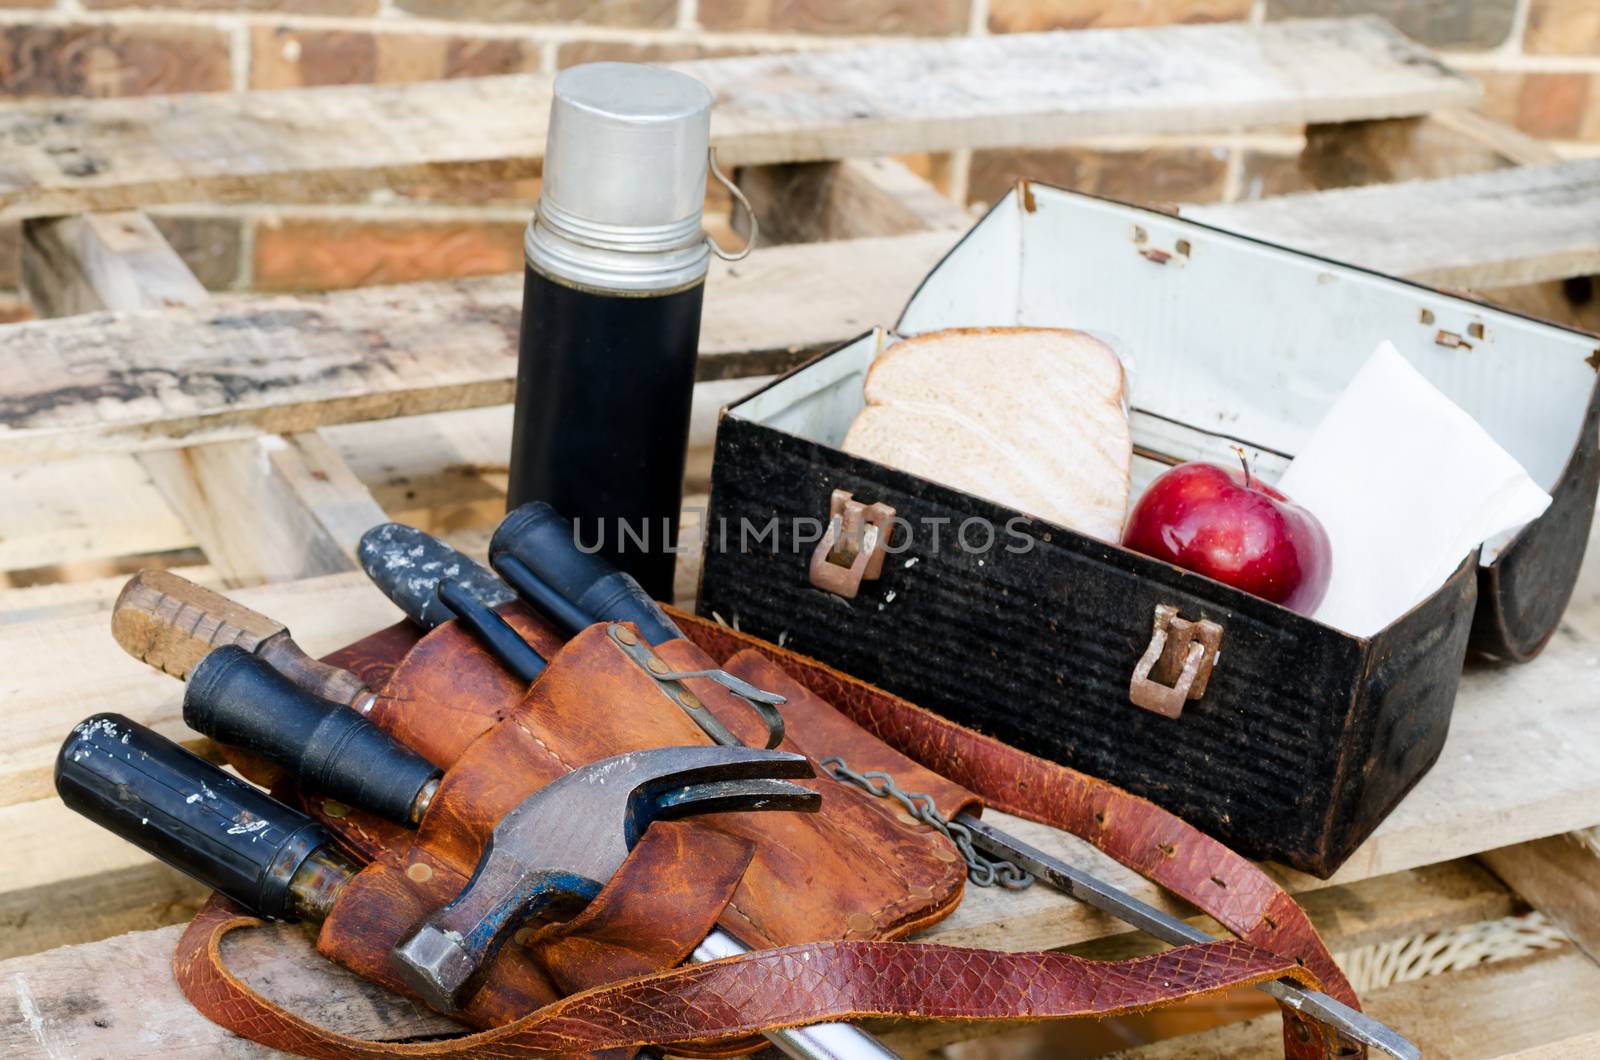 Lunch break at construction site with lunch pail, beverage container, apple, sandwich, napkin, tool belt, hammer, wrenches, screwdrivers on pallet with brick wall in background.